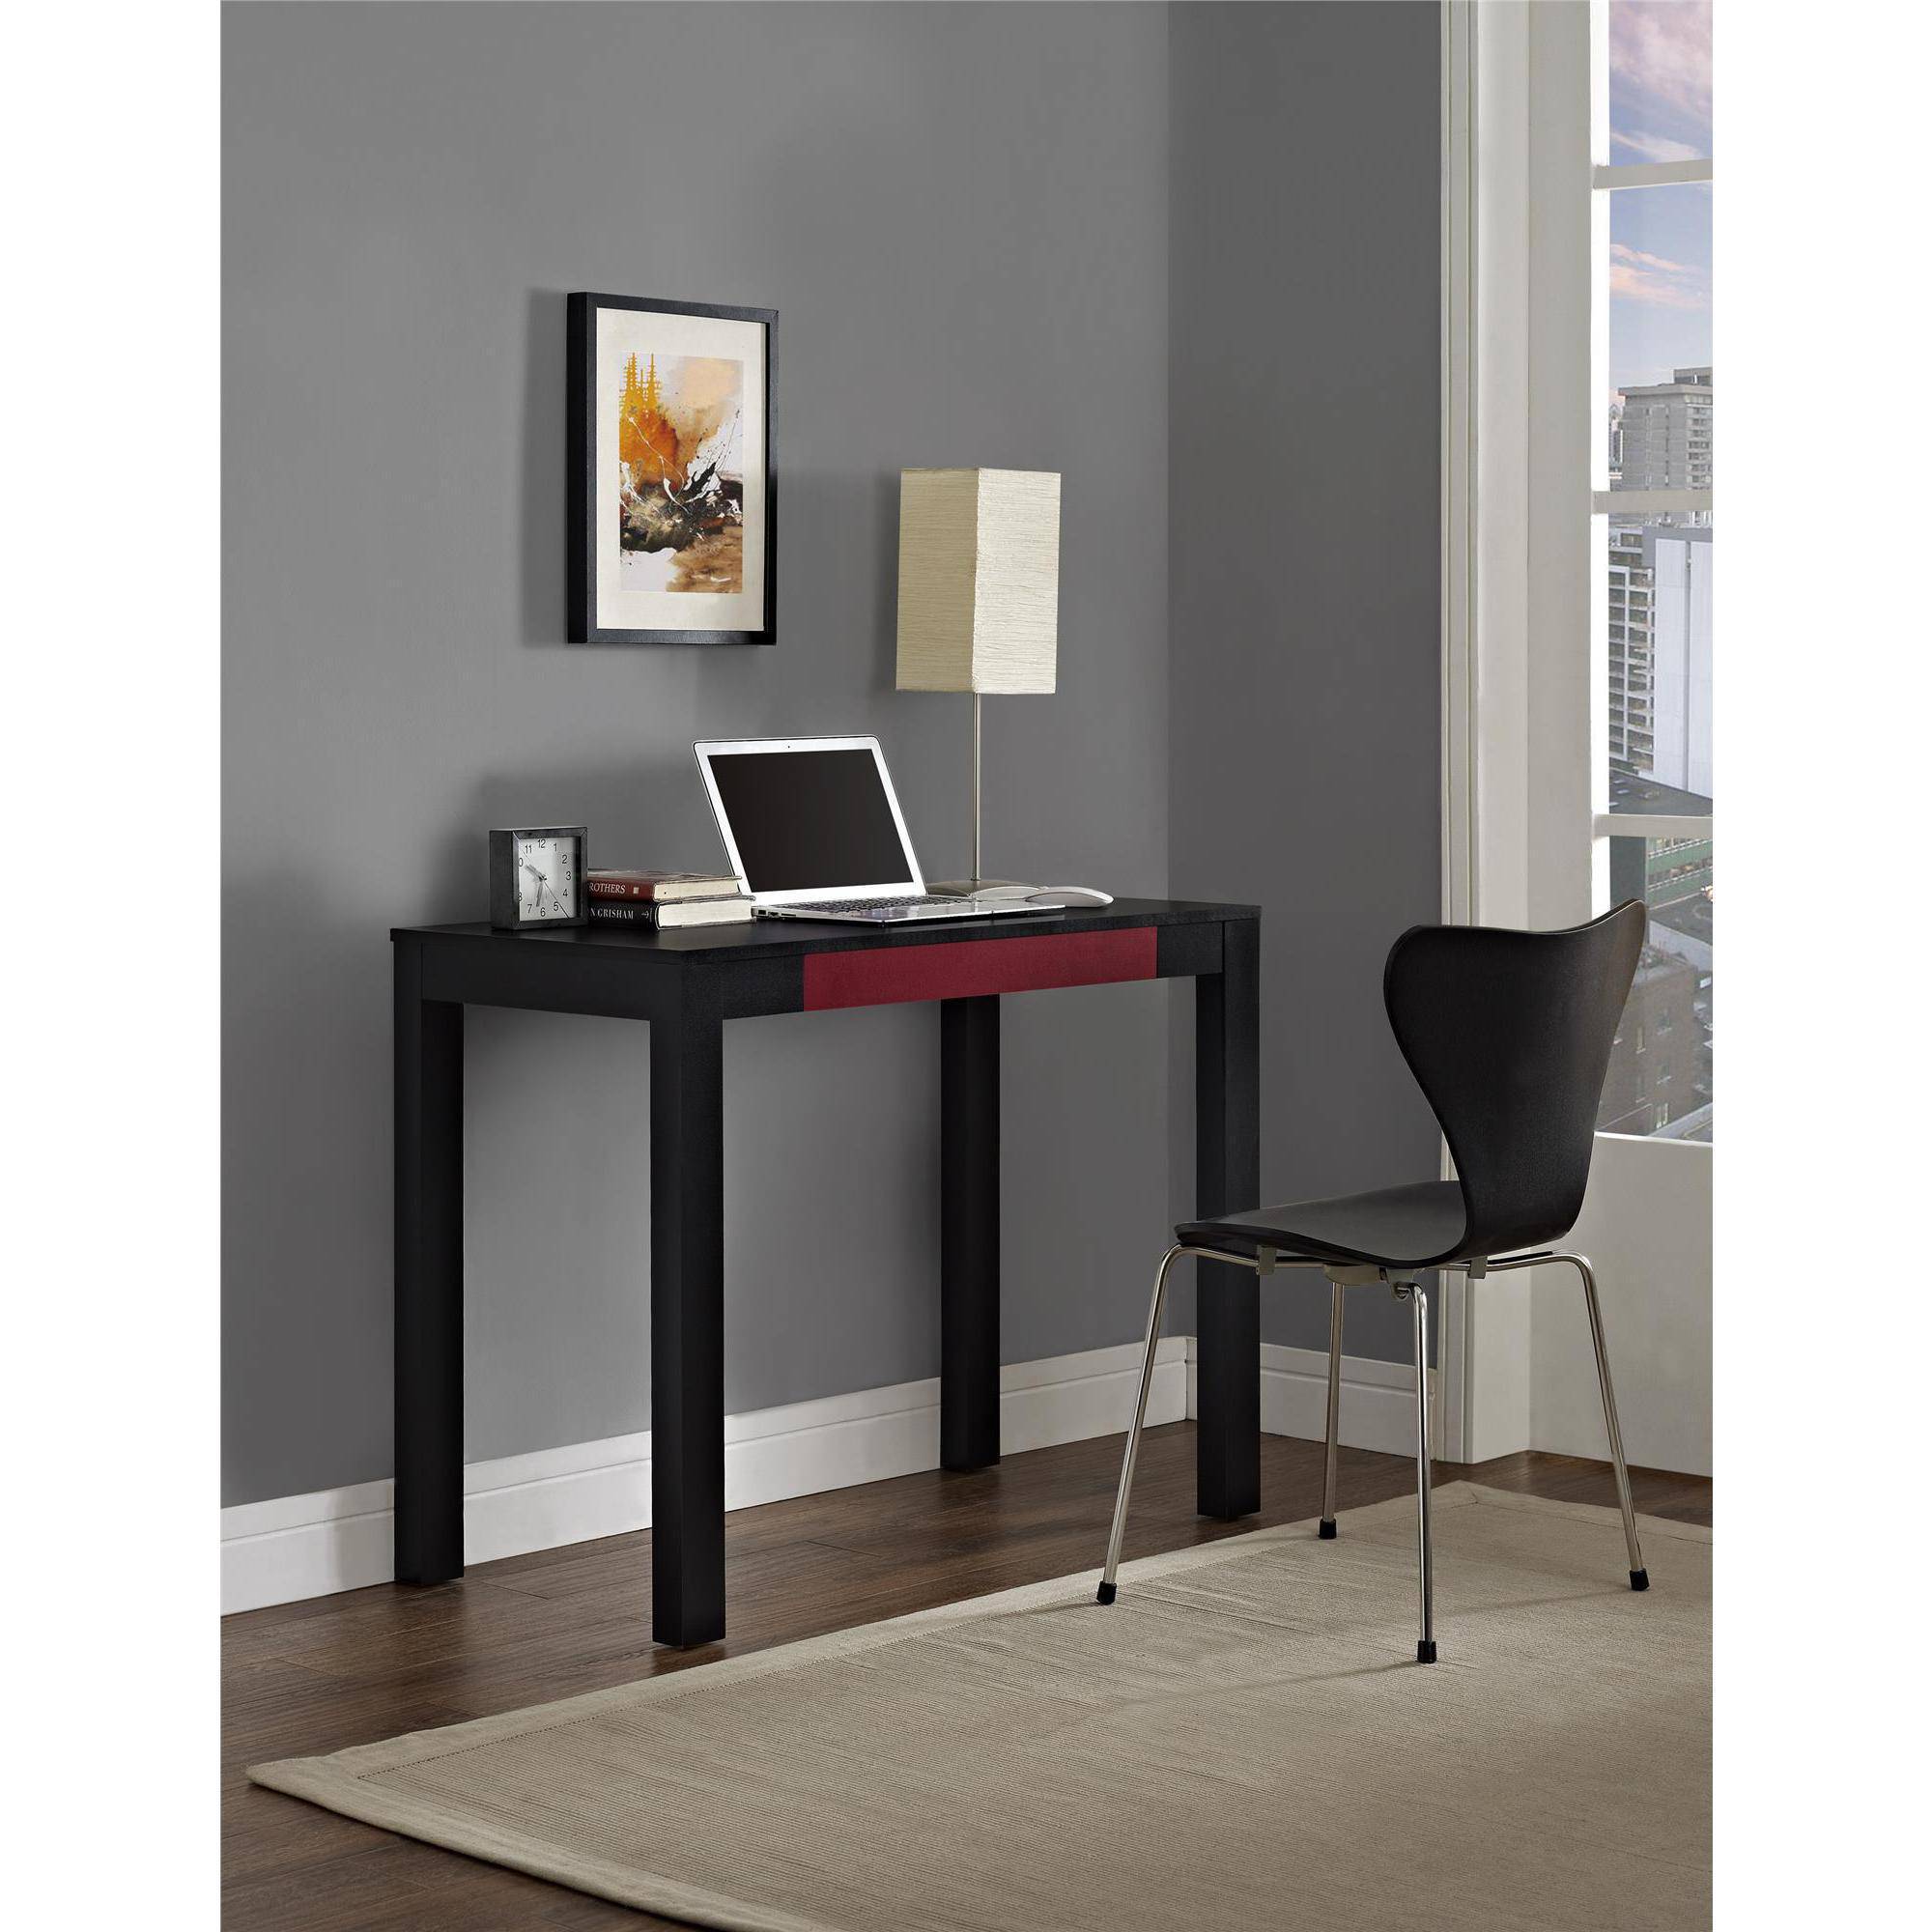 Parsons Desk With Colored Drawer, Multiple Colors - image 1 of 6